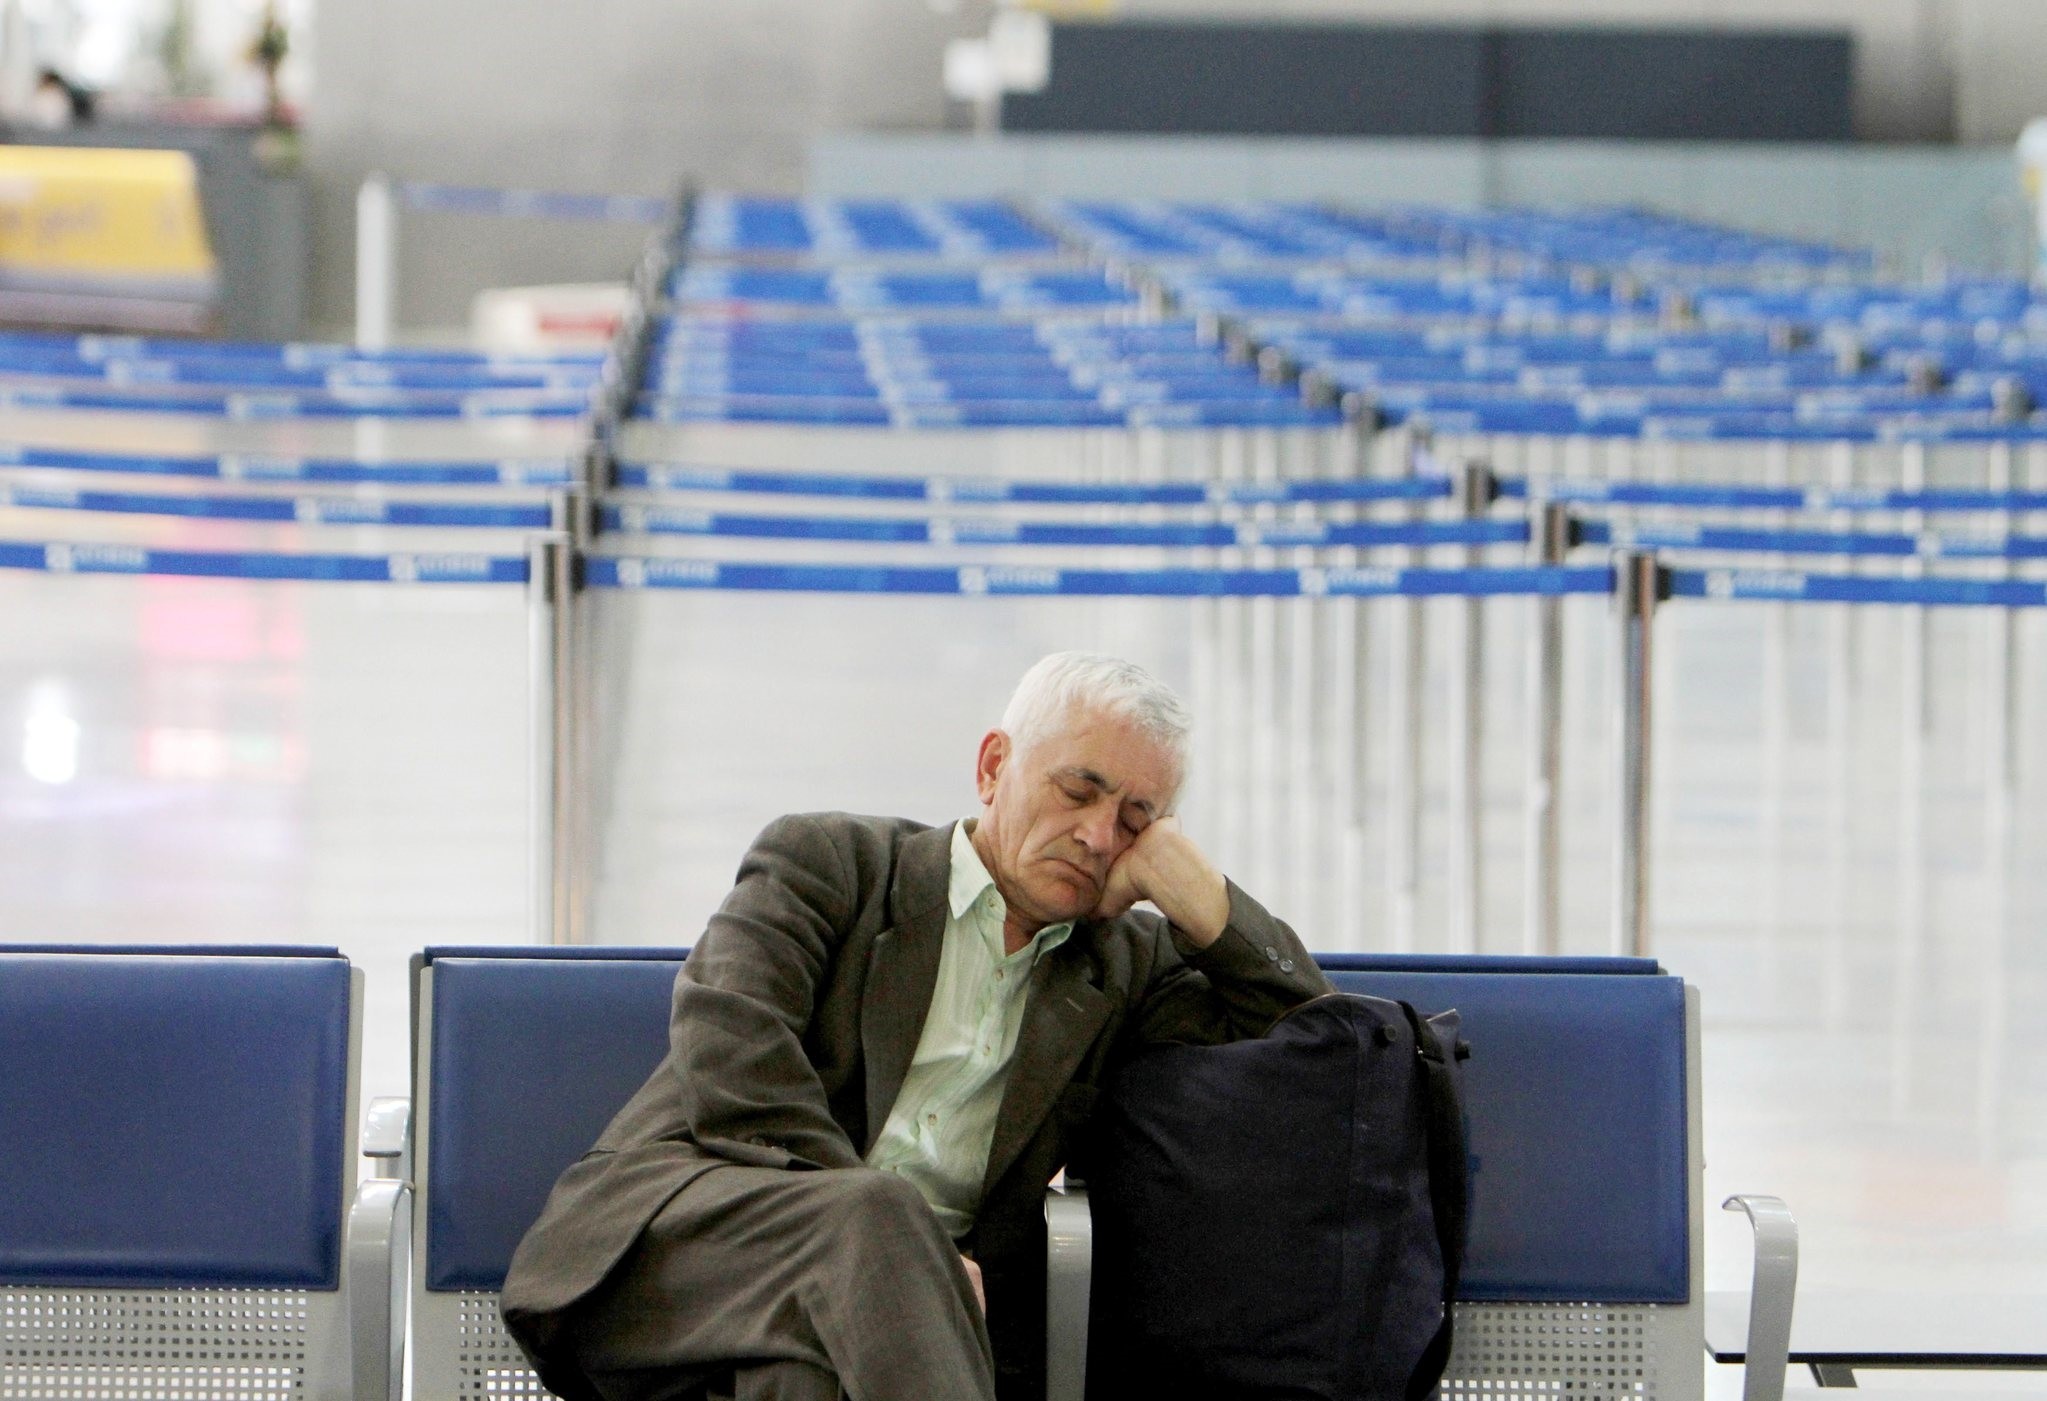 A passenger sleeps during a strike at the Athens International Airport Eleftherios Venizelos in Spata on Wednesday, Feb. 24, 2010. (AP Photo)